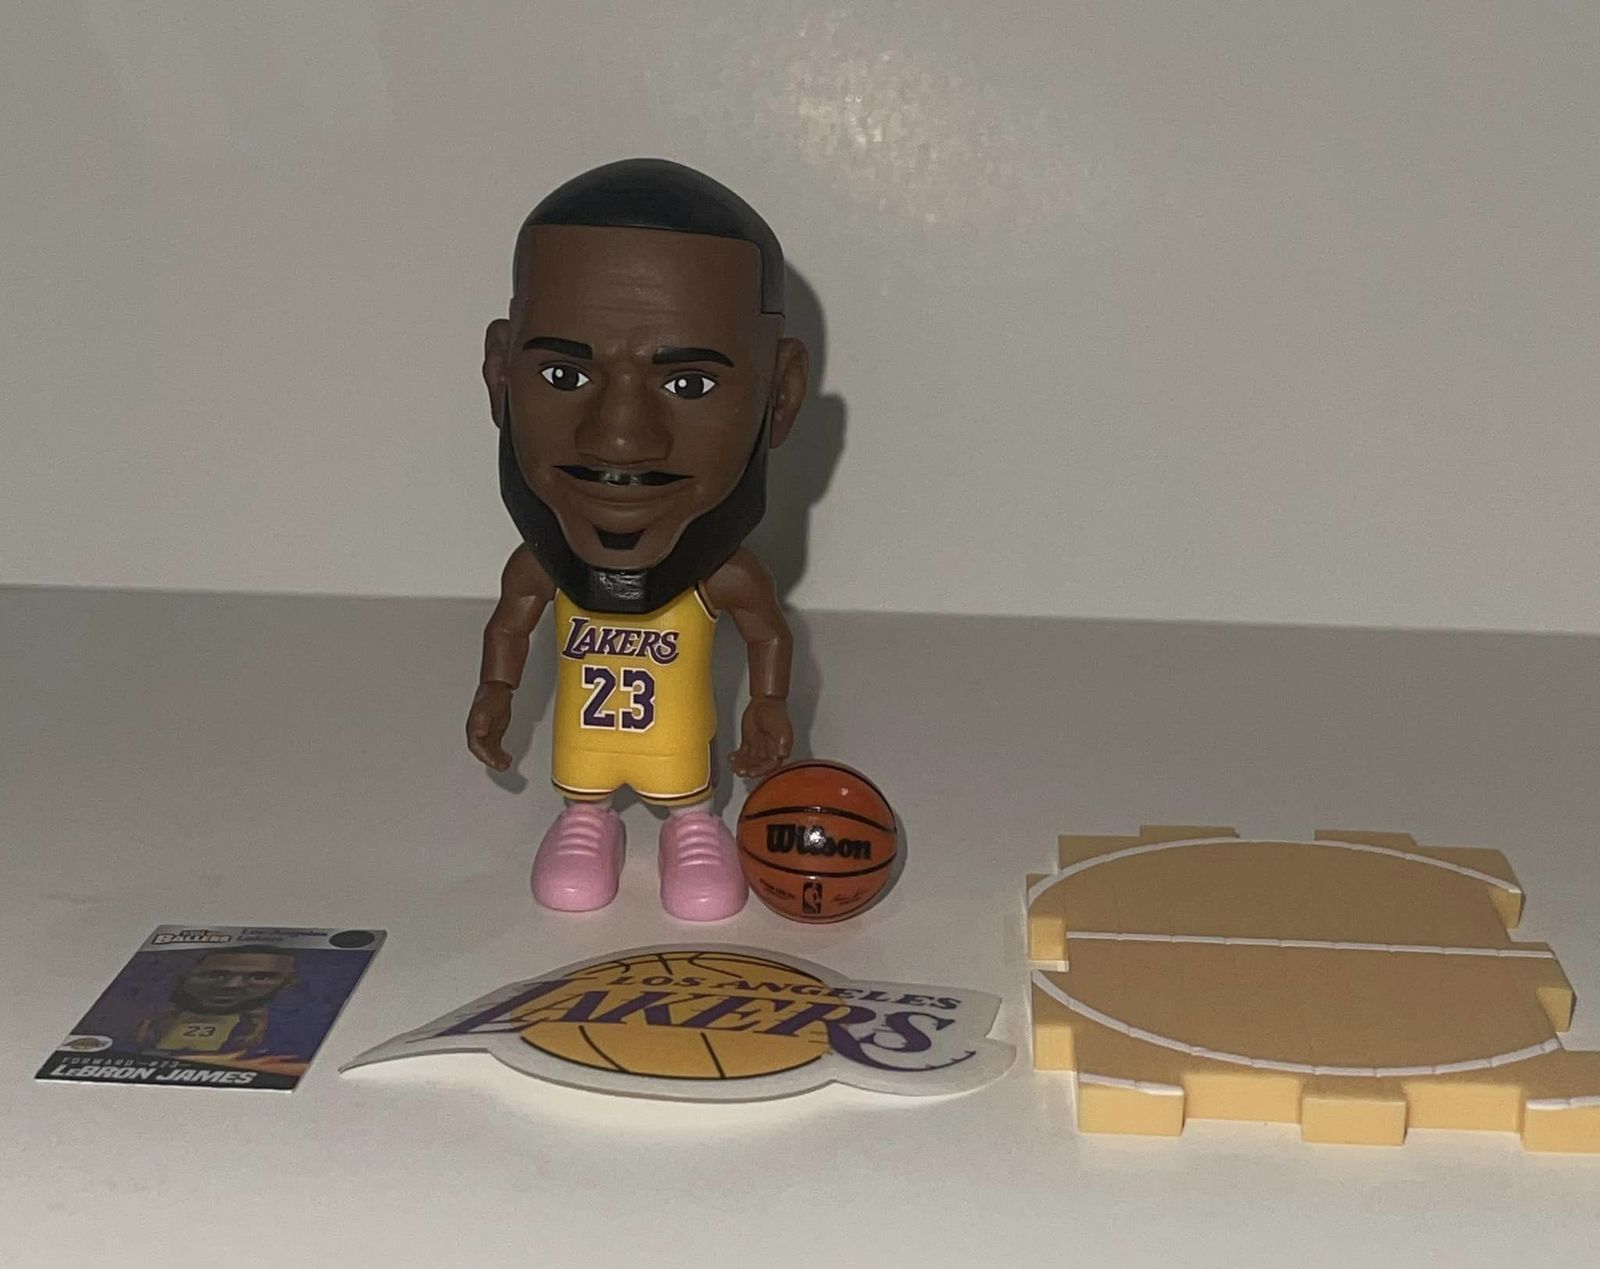 Primary image for NBA BALLERS - Los Angeles Lakers - LeBRON JAMES (Figure)